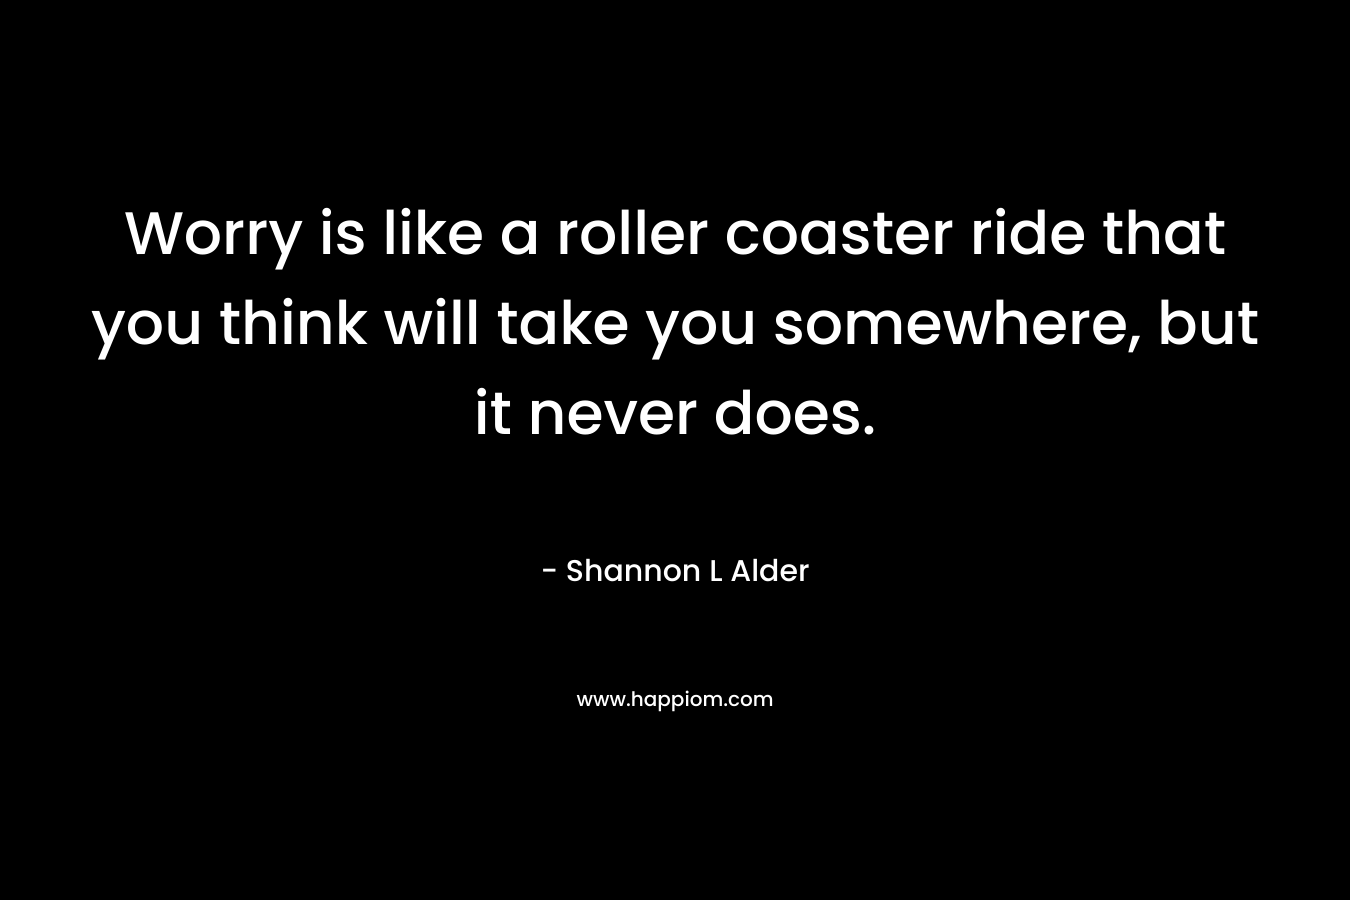 Worry is like a roller coaster ride that you think will take you somewhere, but it never does. – Shannon L Alder